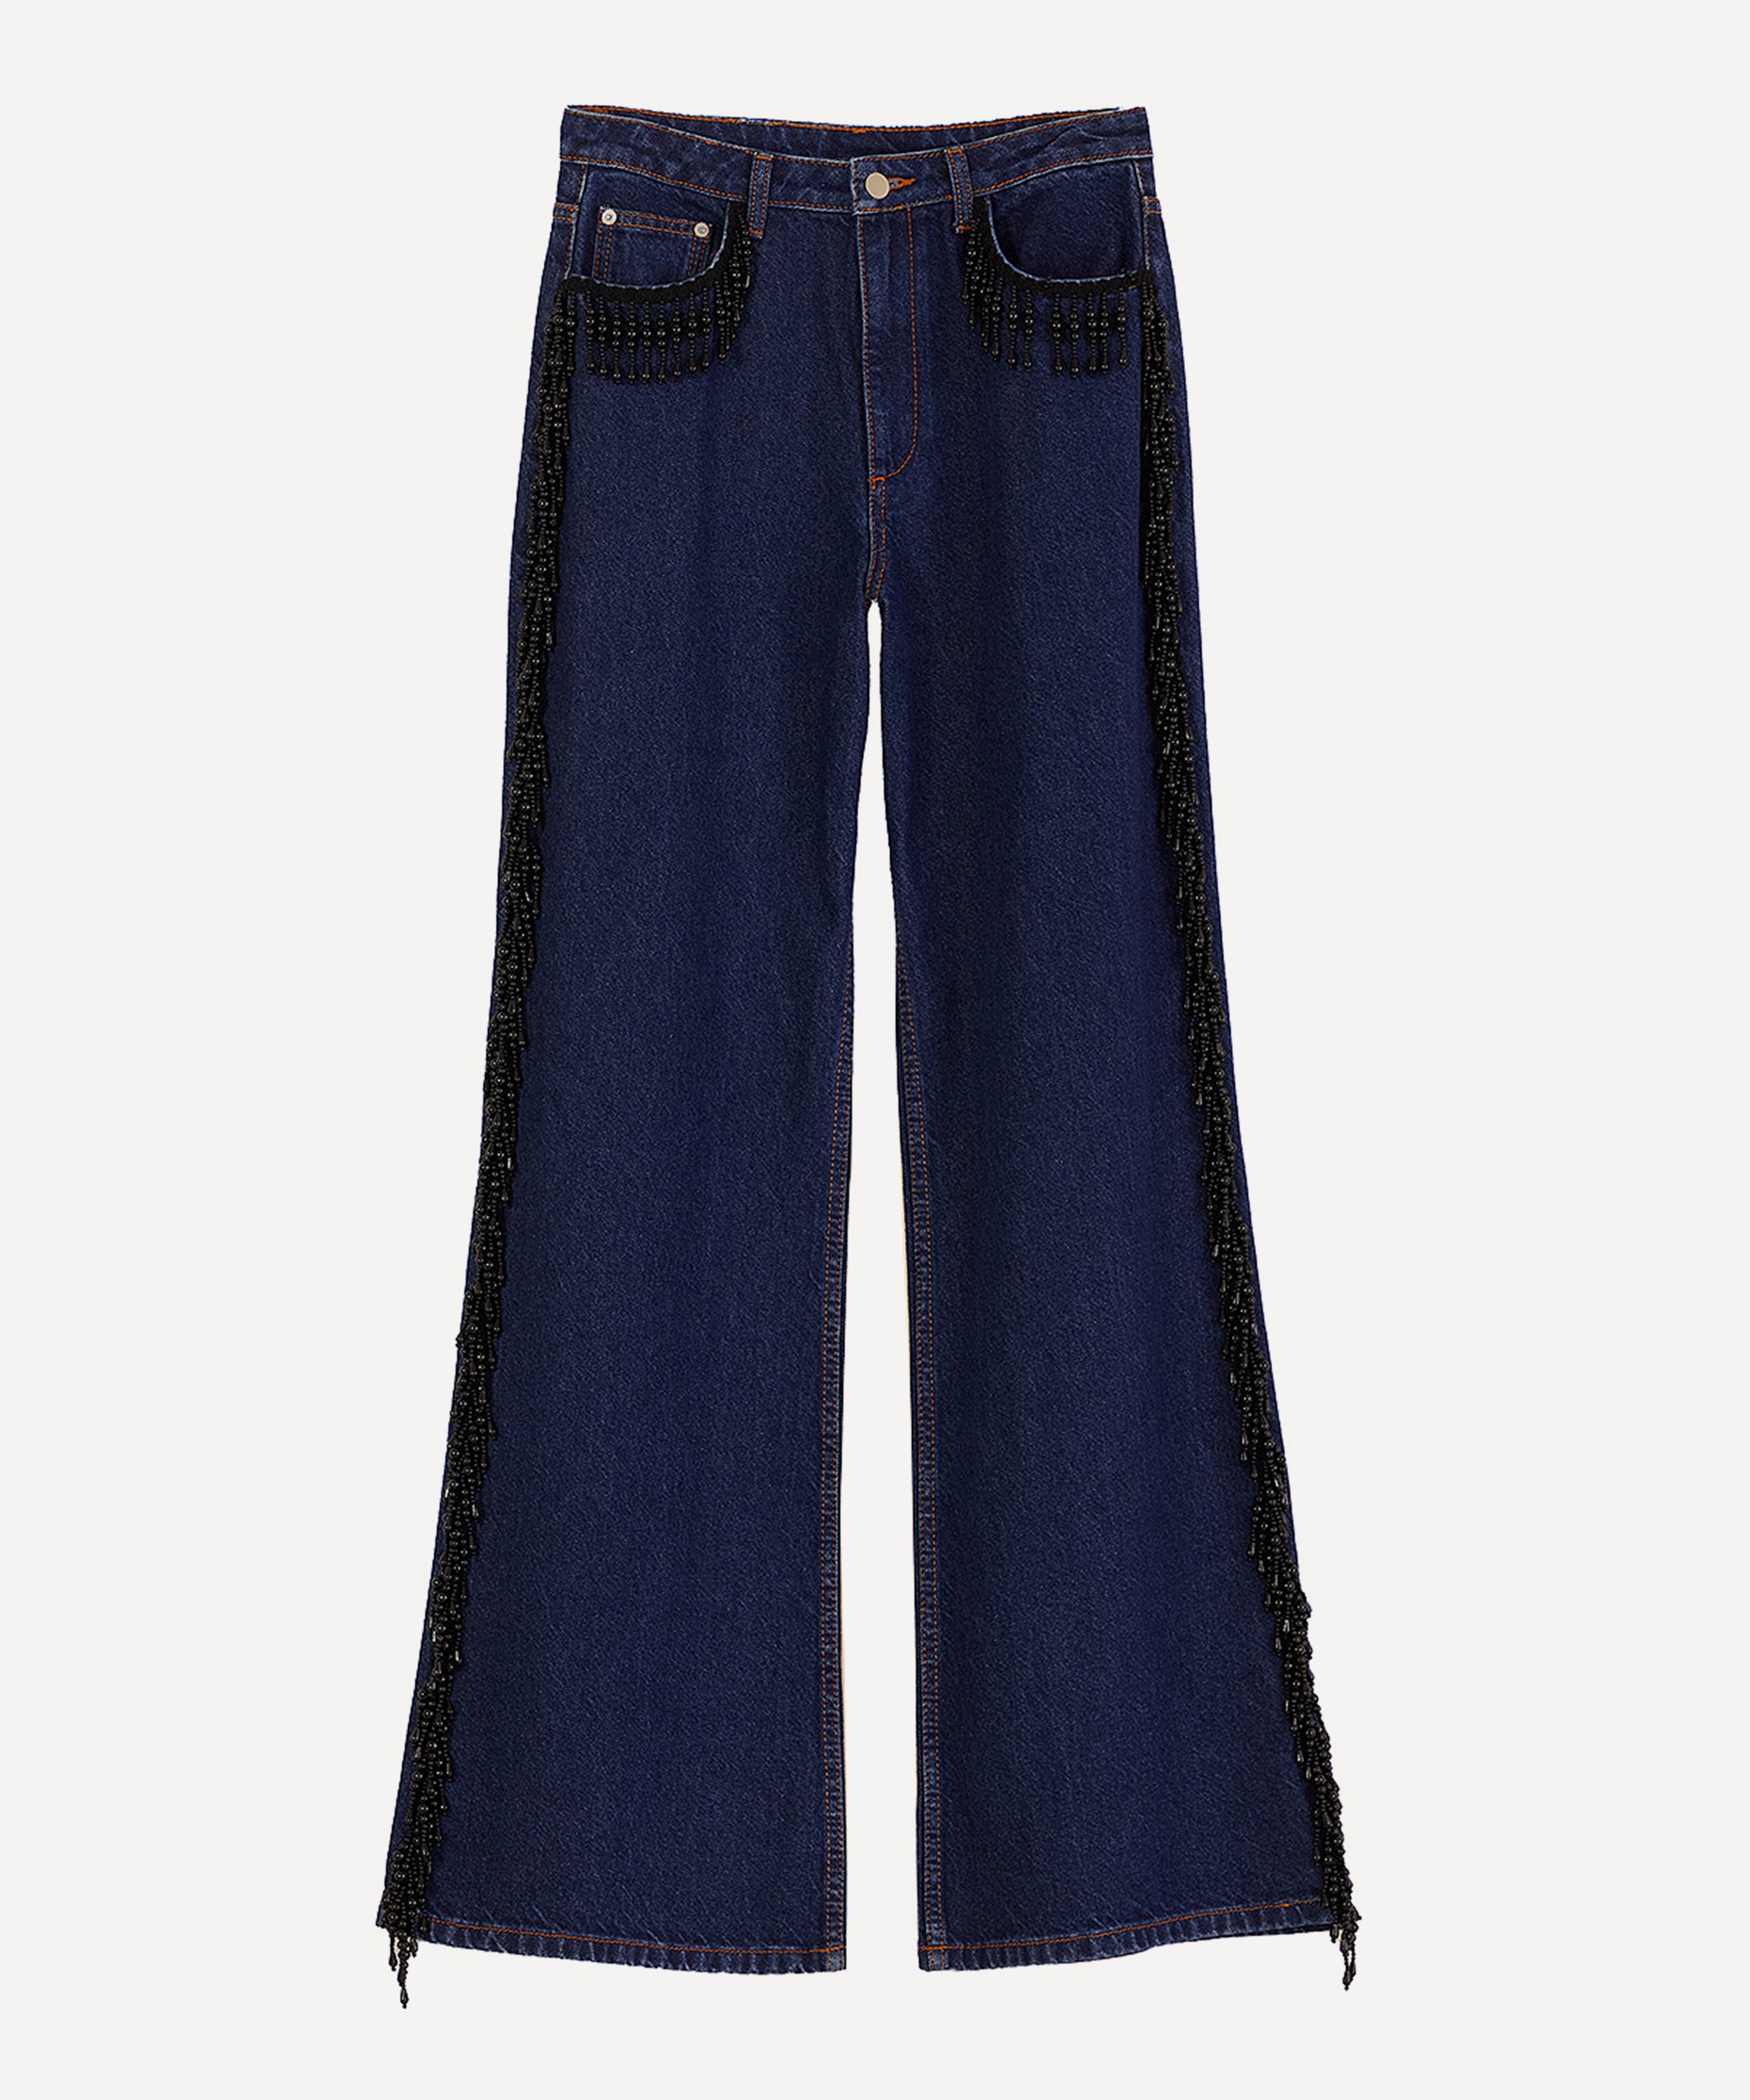 FARM Rio - Fringe Beaded Wide Jeans image number 0